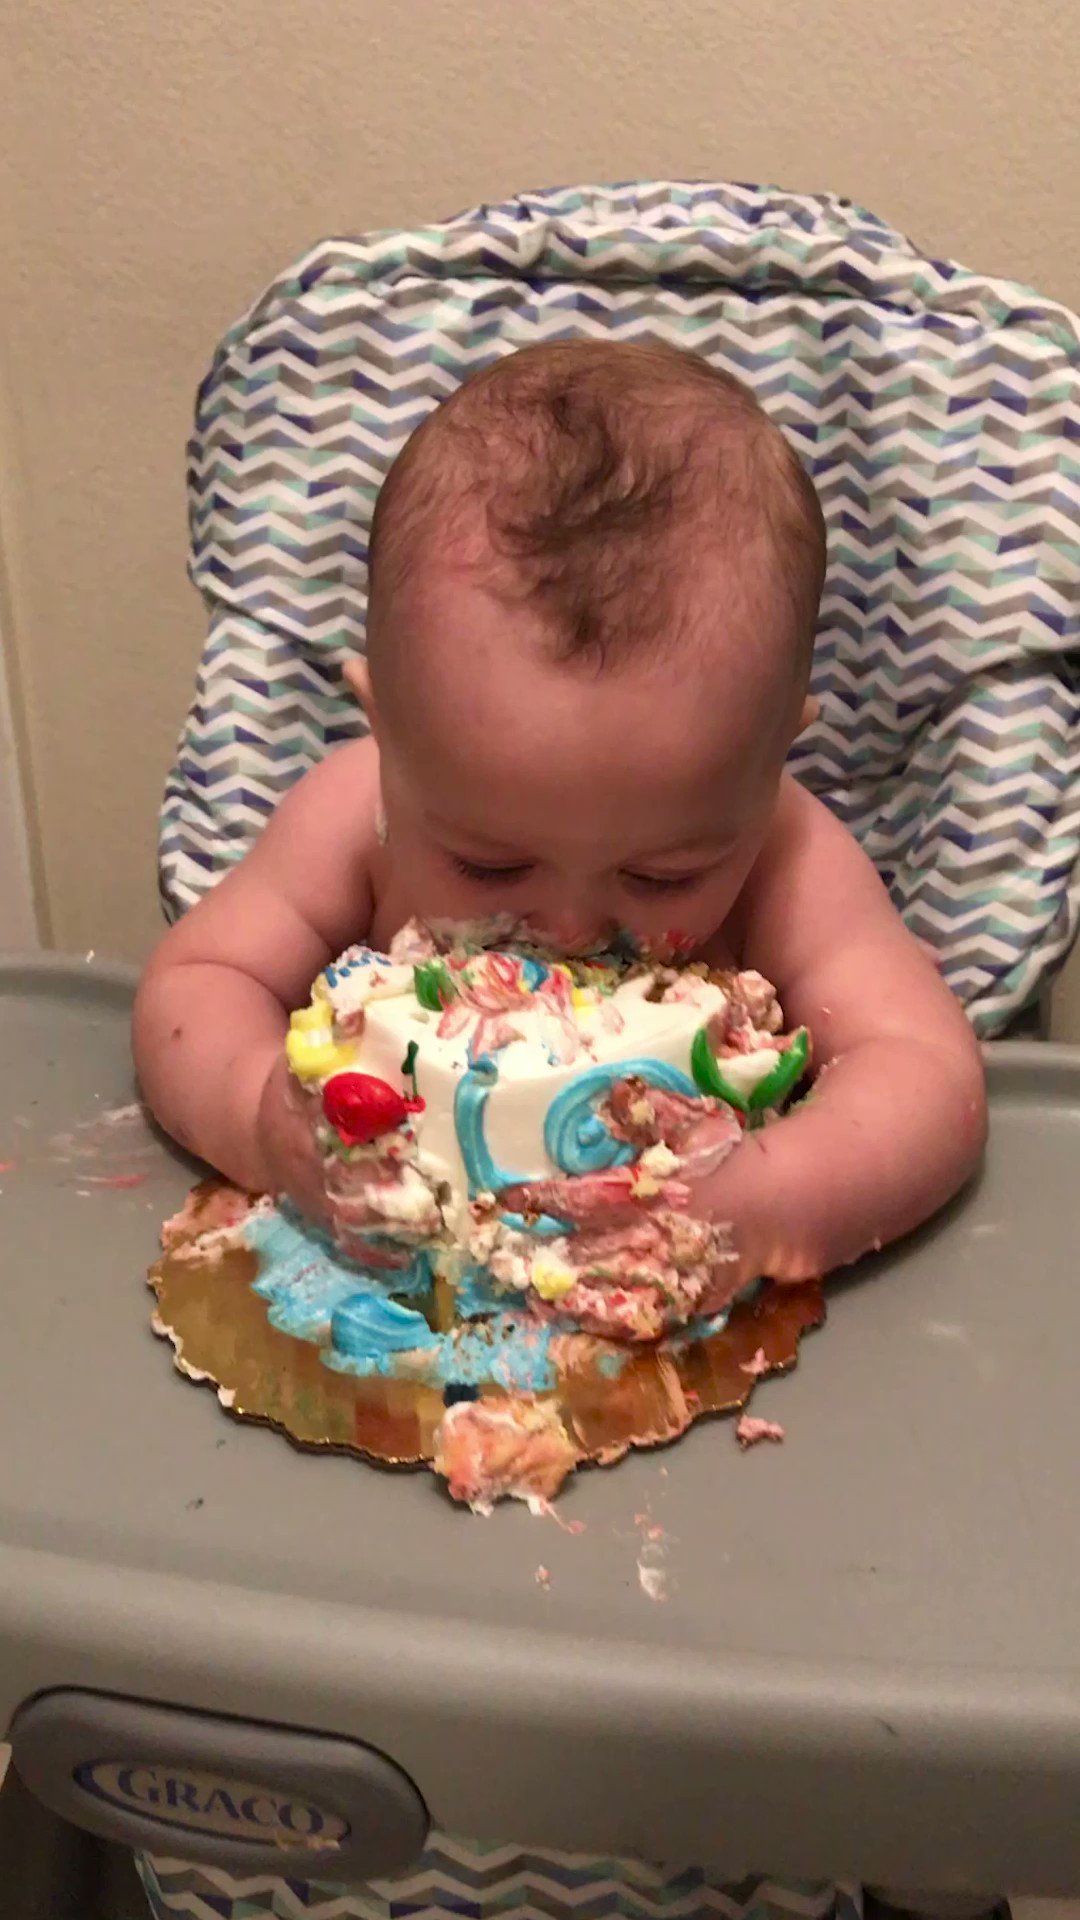 Let Them Eat Cake, Seriously! | HuffPost Weird News